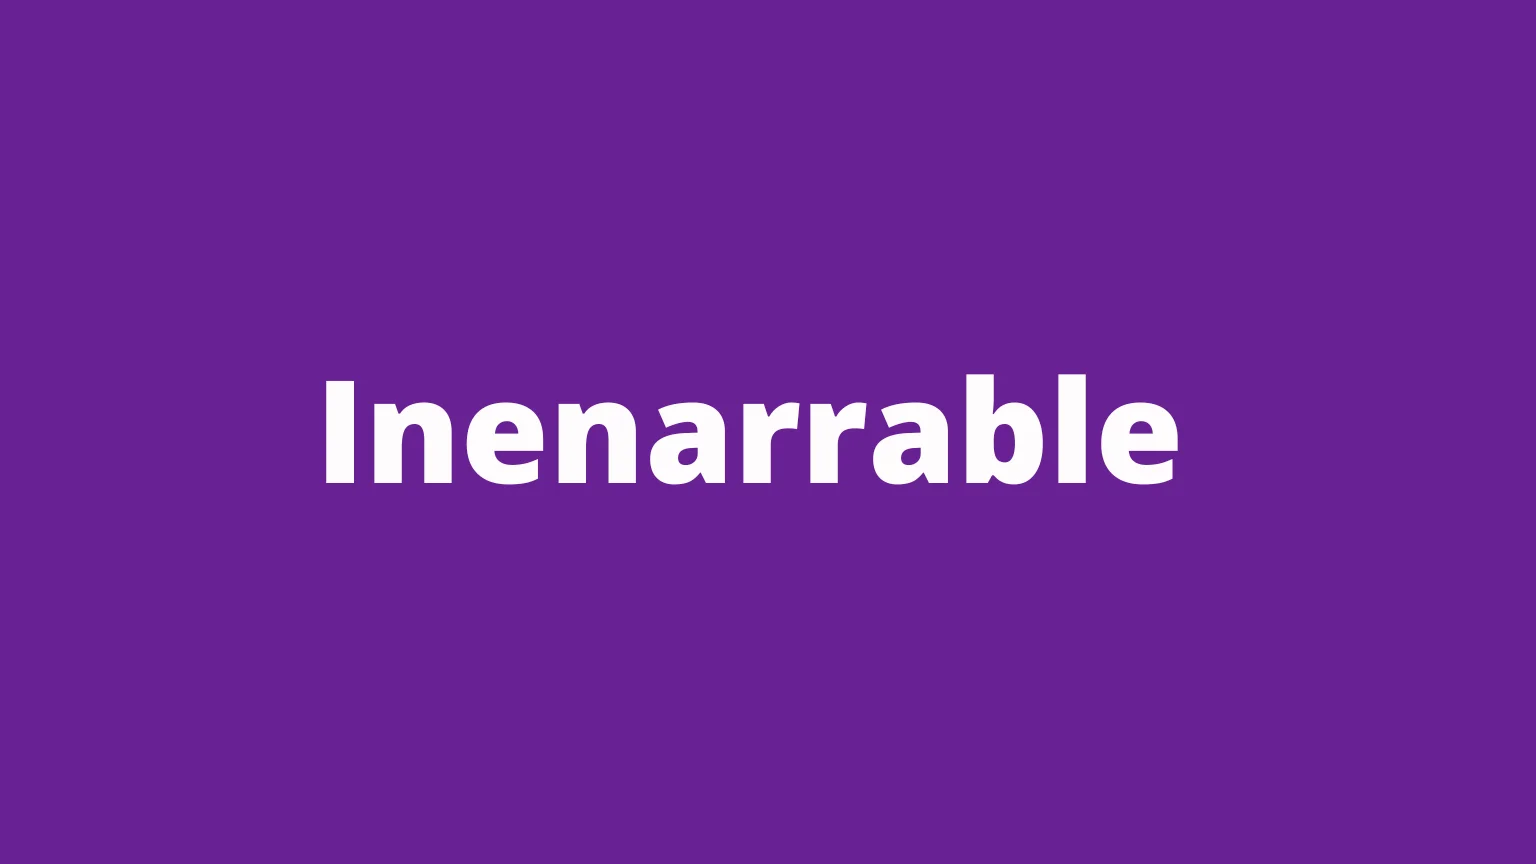 The word inenarrable and its meaning